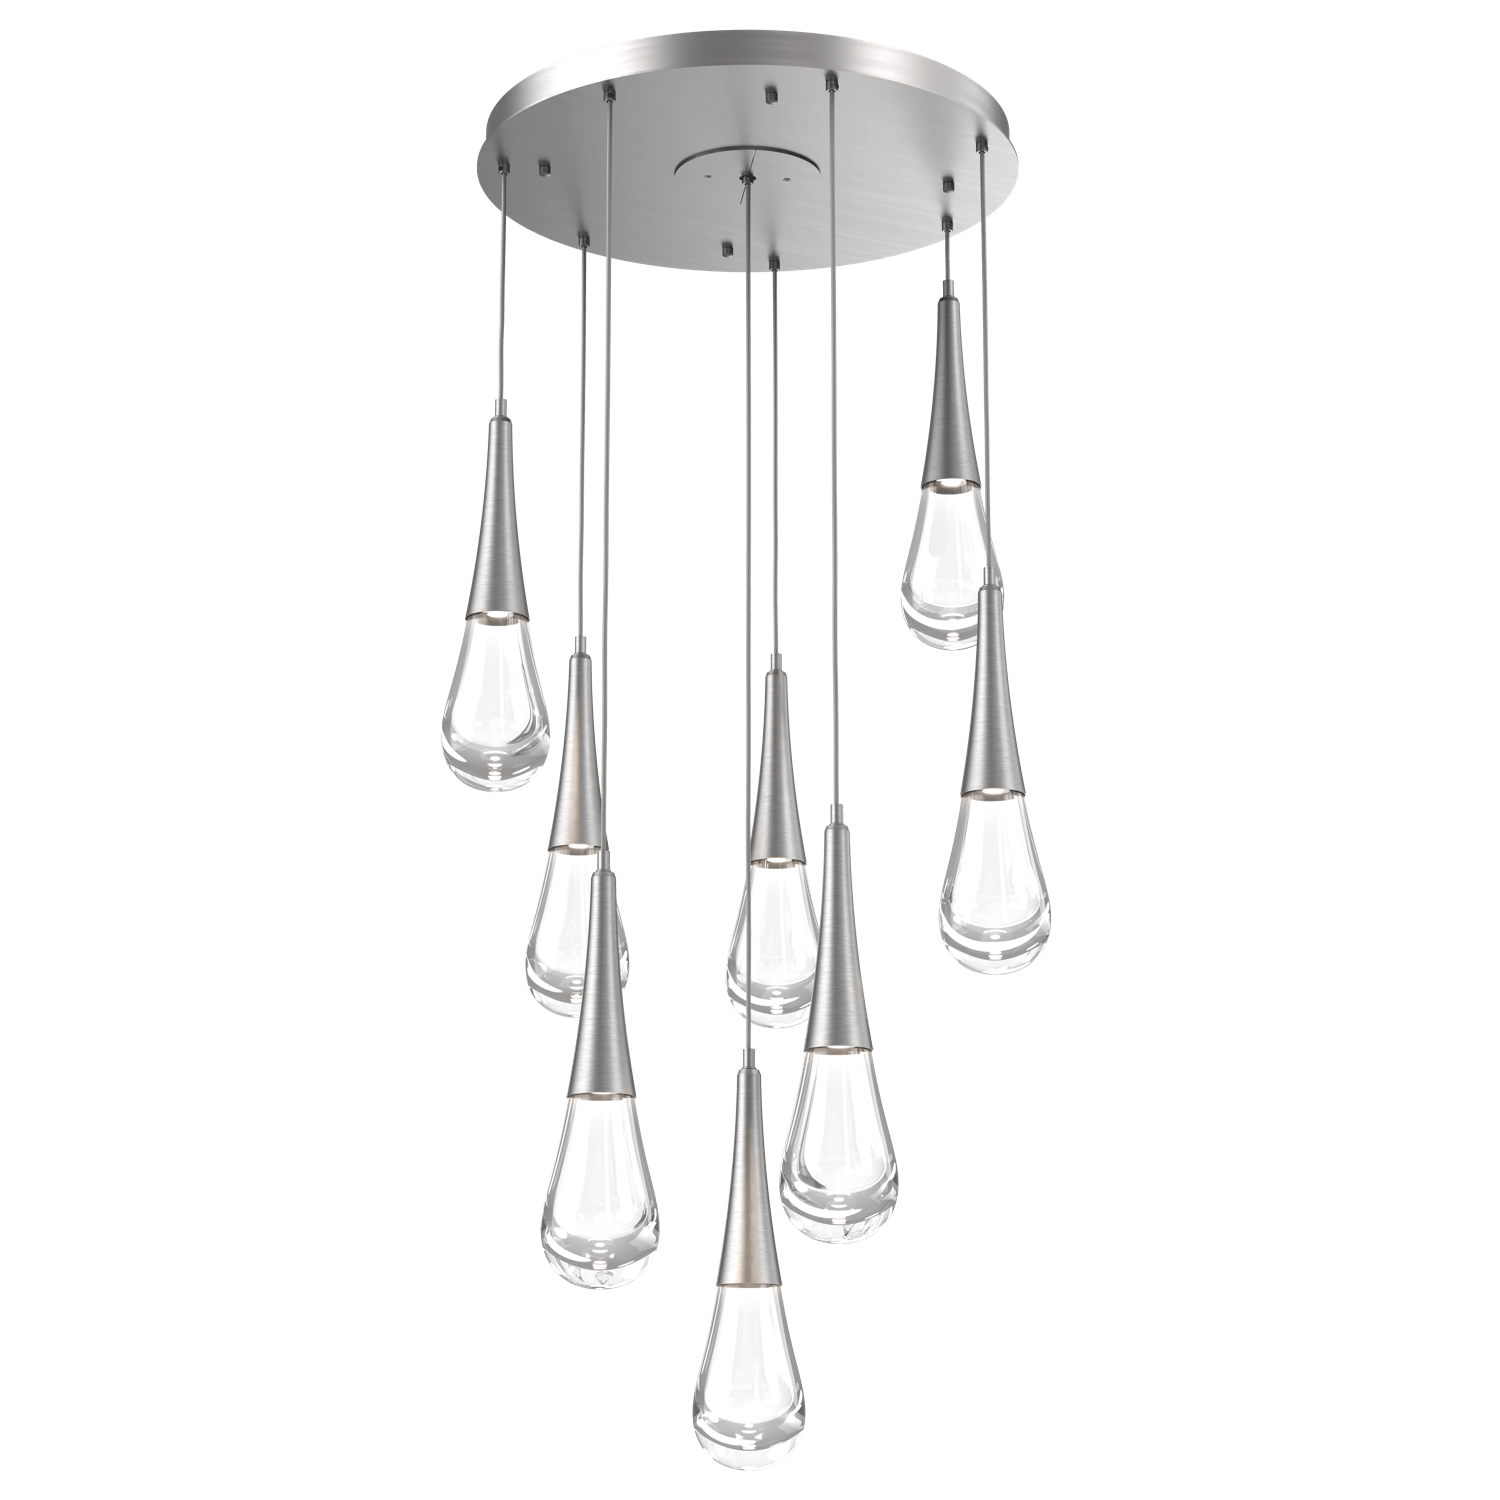 CHB0078-08-SN-Hammerton-Studio-Raindrop-8-light-round-pendant-chandelier-with-satin-nickel-finish-and-clear-blown-glass-shades-and-LED-lamping